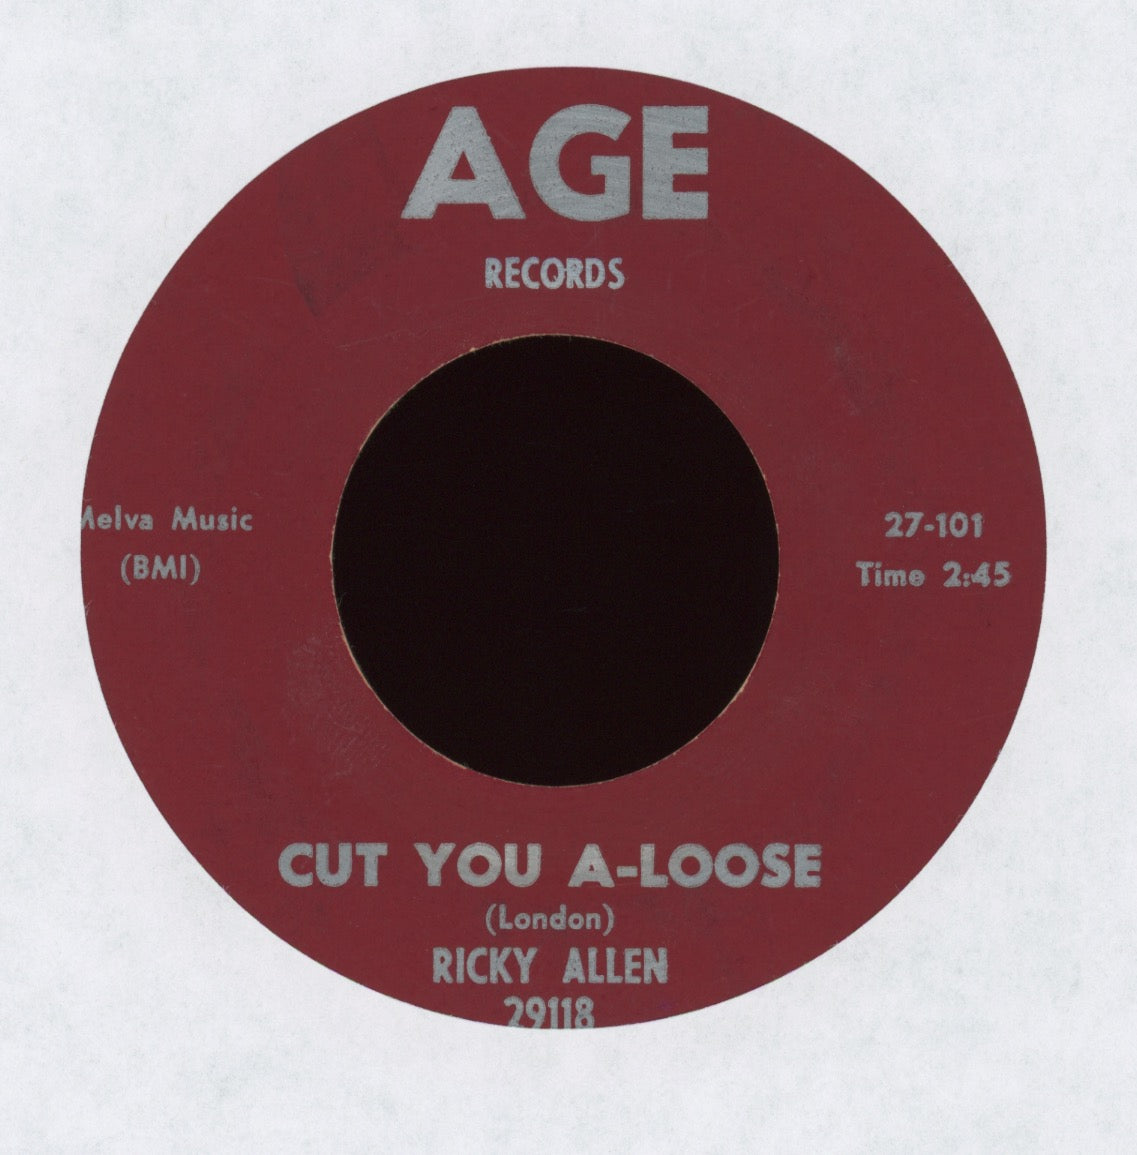 Ricky Allen - Cut You A-Loose on Age